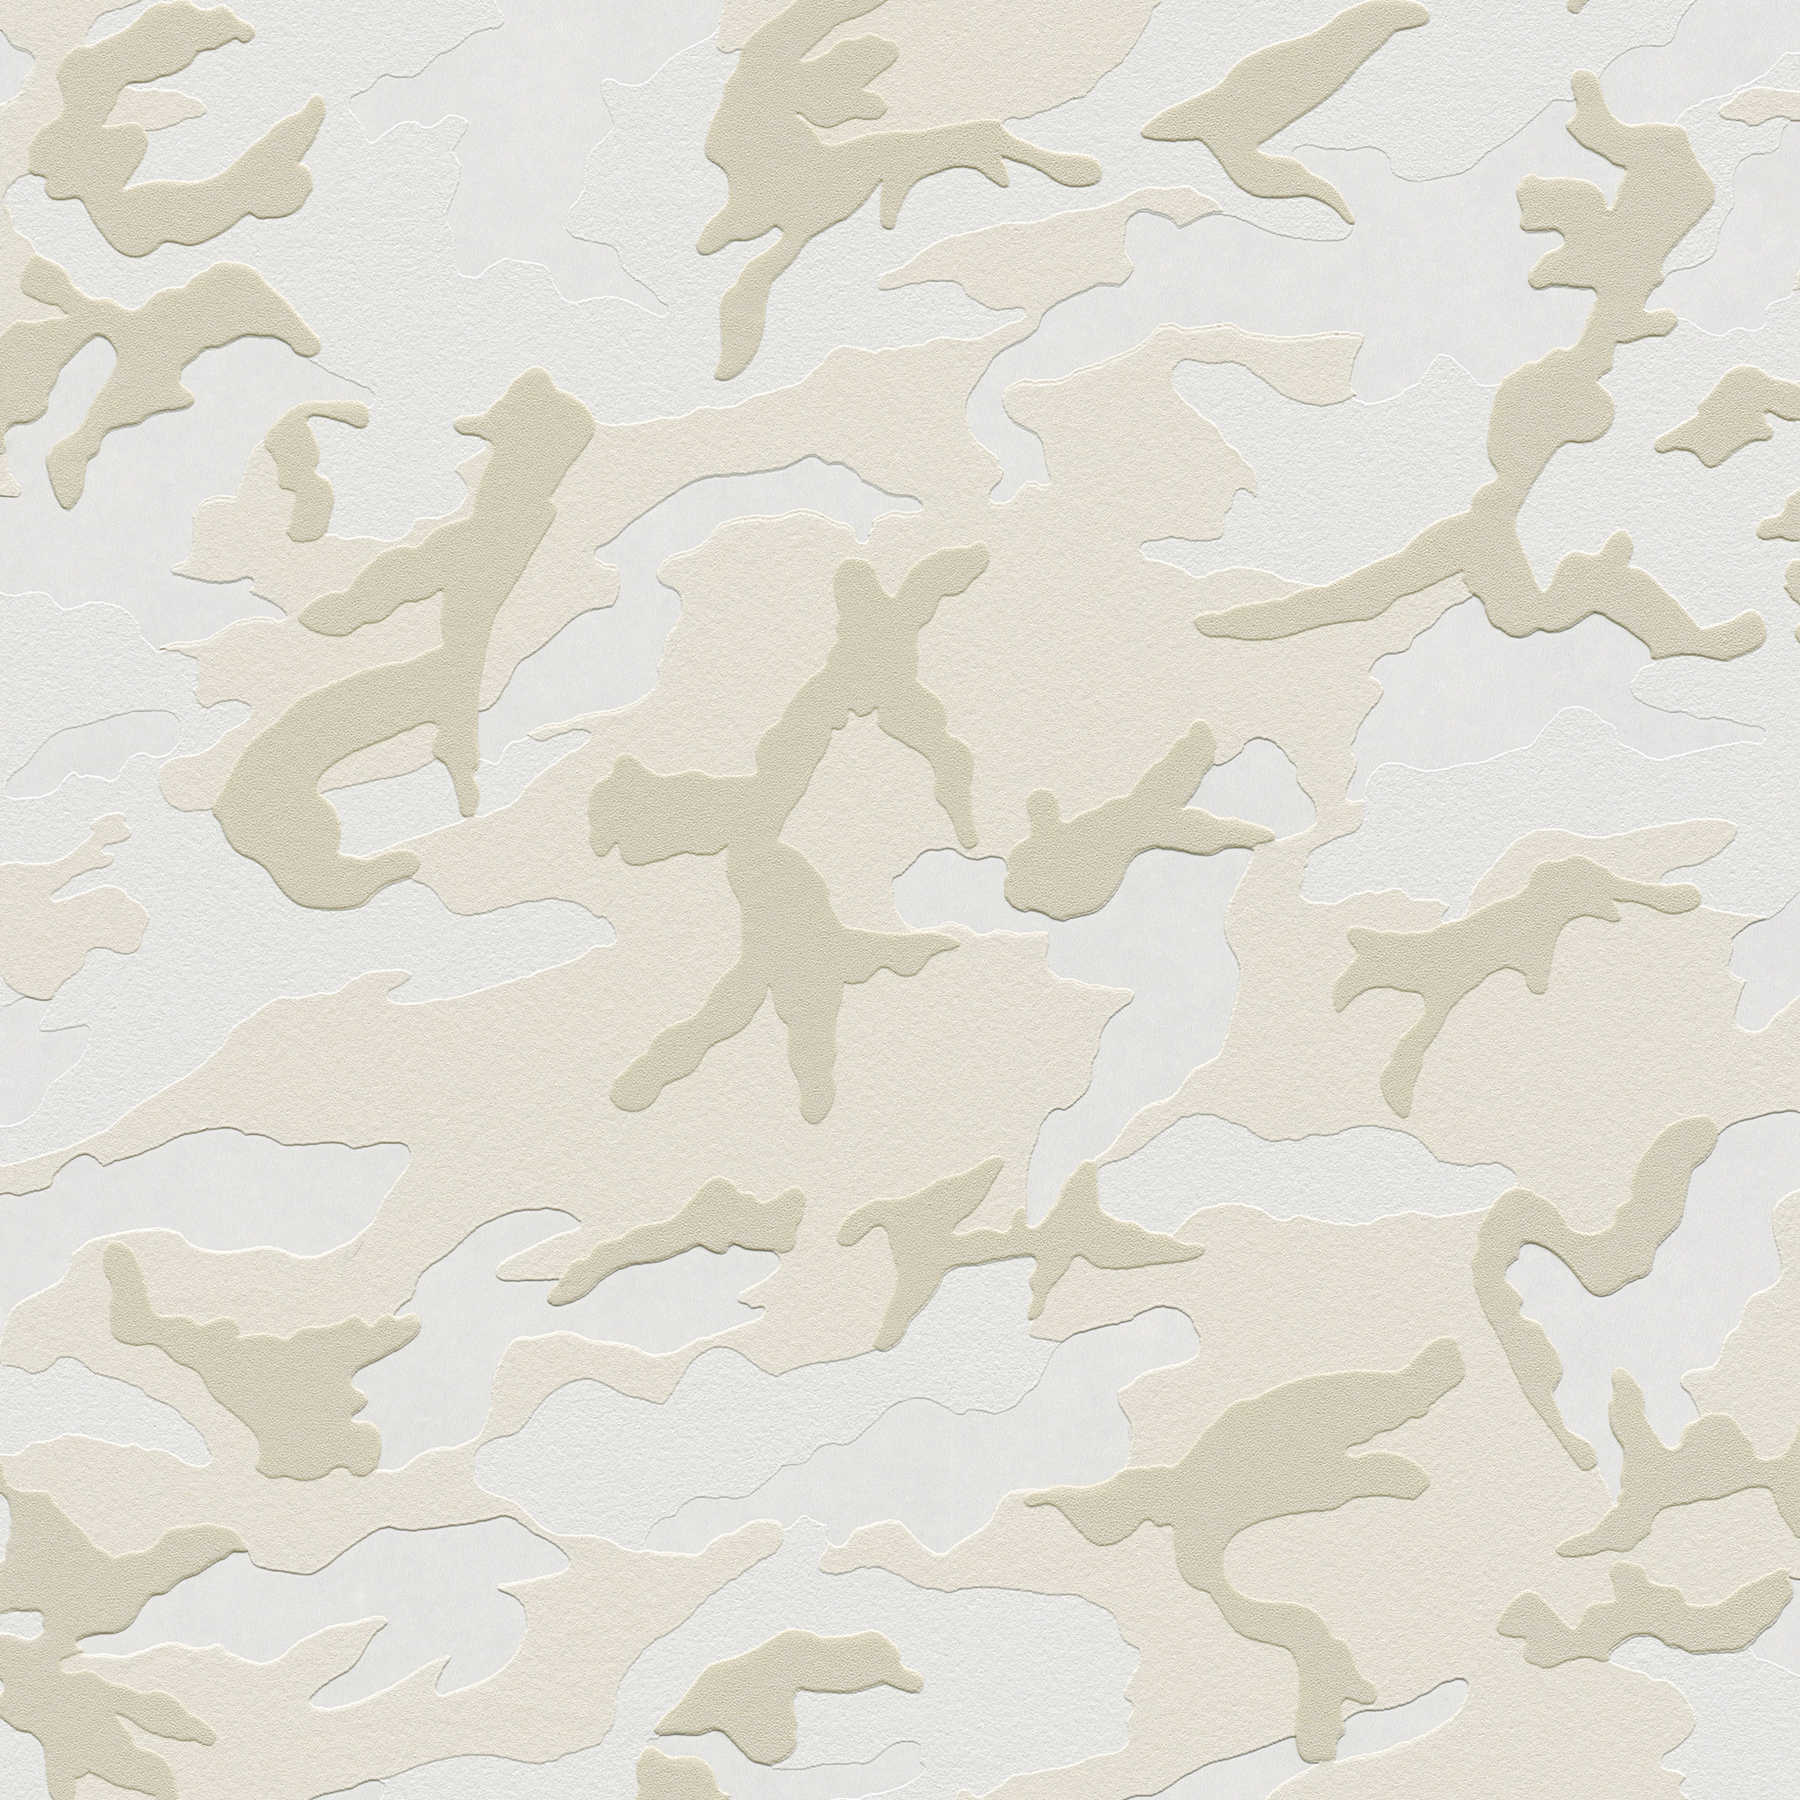 Camouflage pattern wallpaper snow, camouflage non-woven wallpaper - grey, cream
